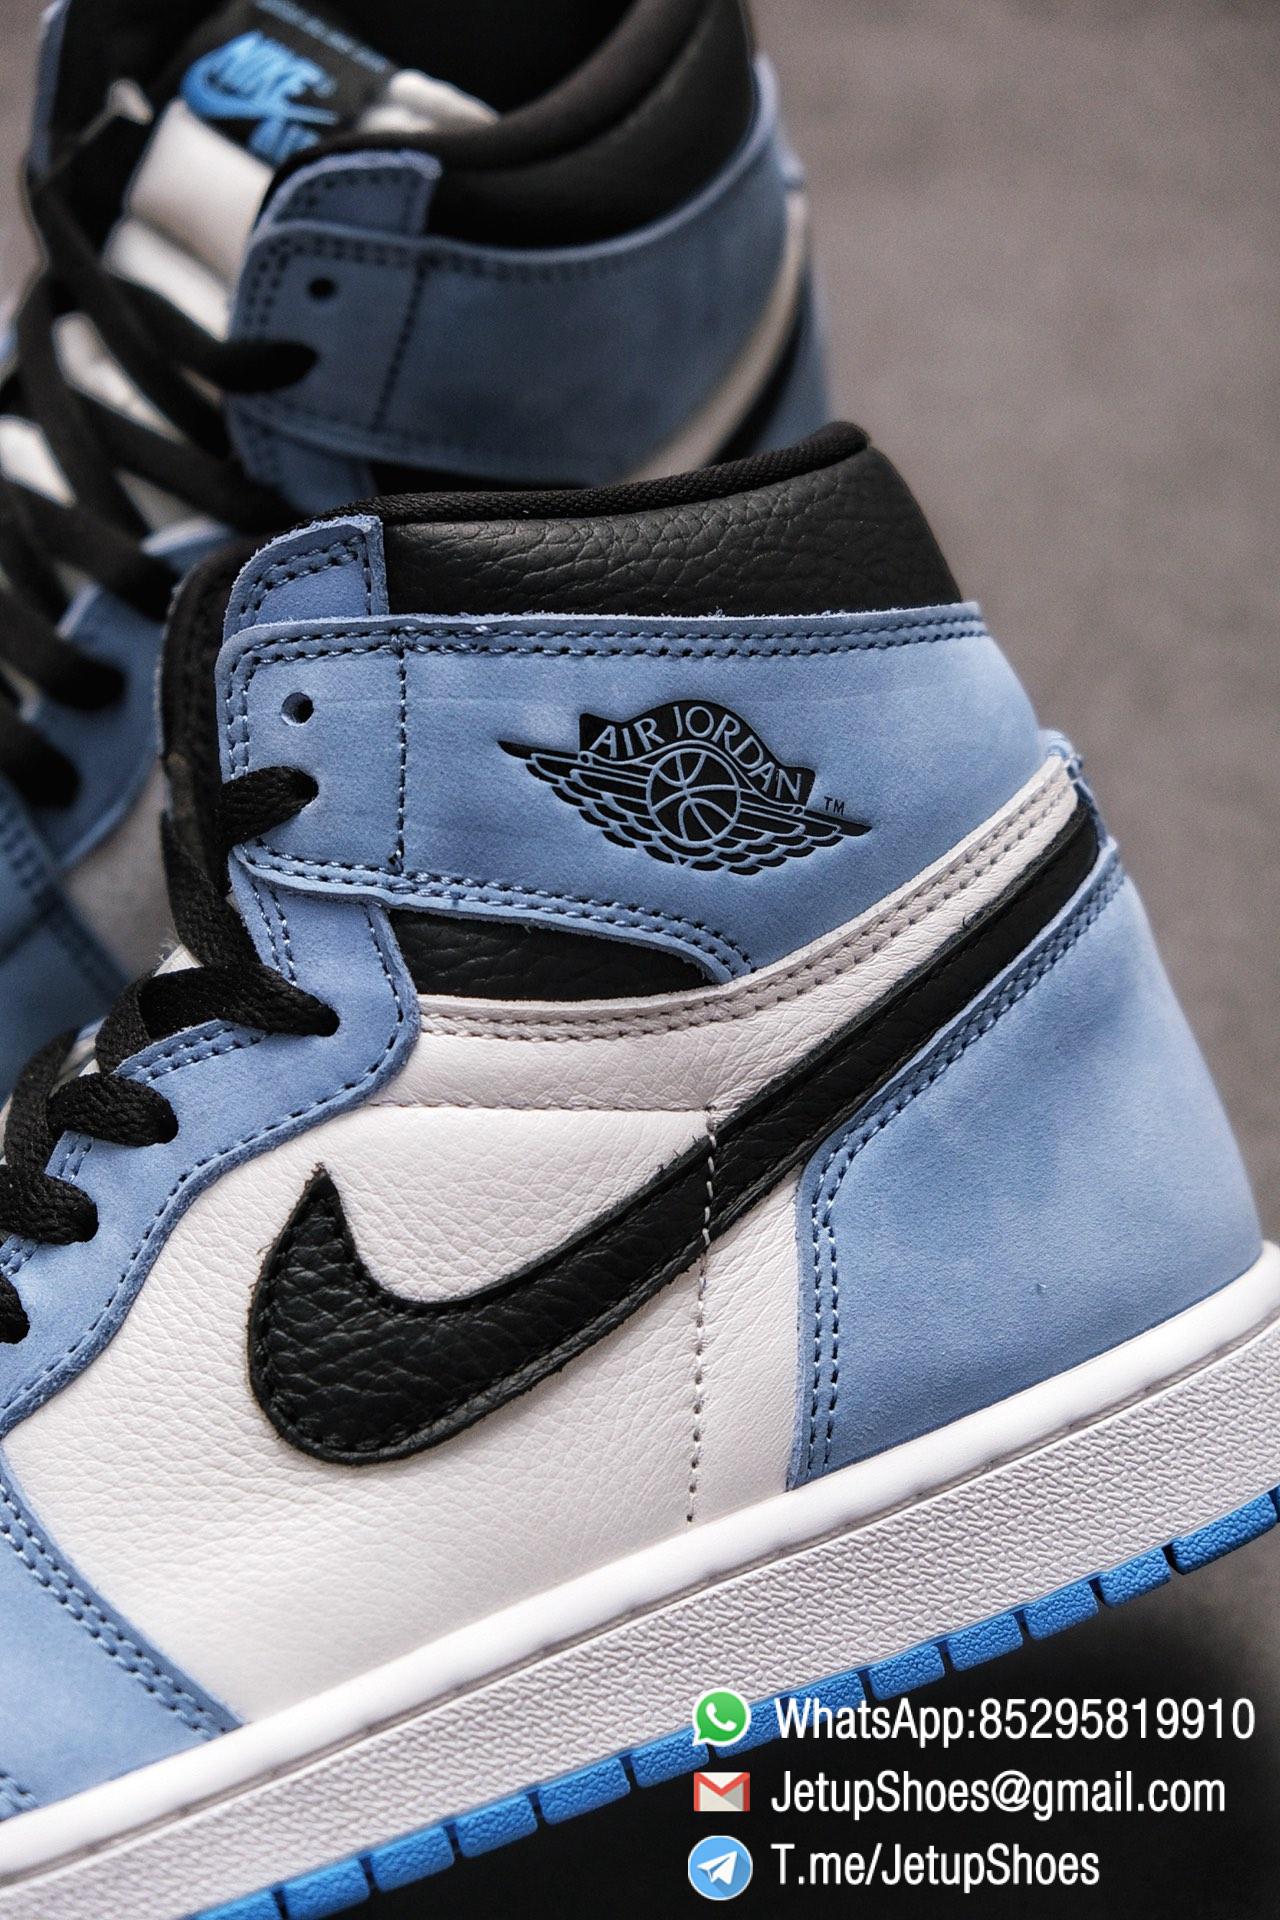 Aanval Menagerry opslag Replica Snkrs Air Jordan 1 Retro High OG University Blue Leather White  Upper Blue Overlays Black Signature Swoosh SKU 555088 134 – The Quality  Replica Sneakers Supplier in China